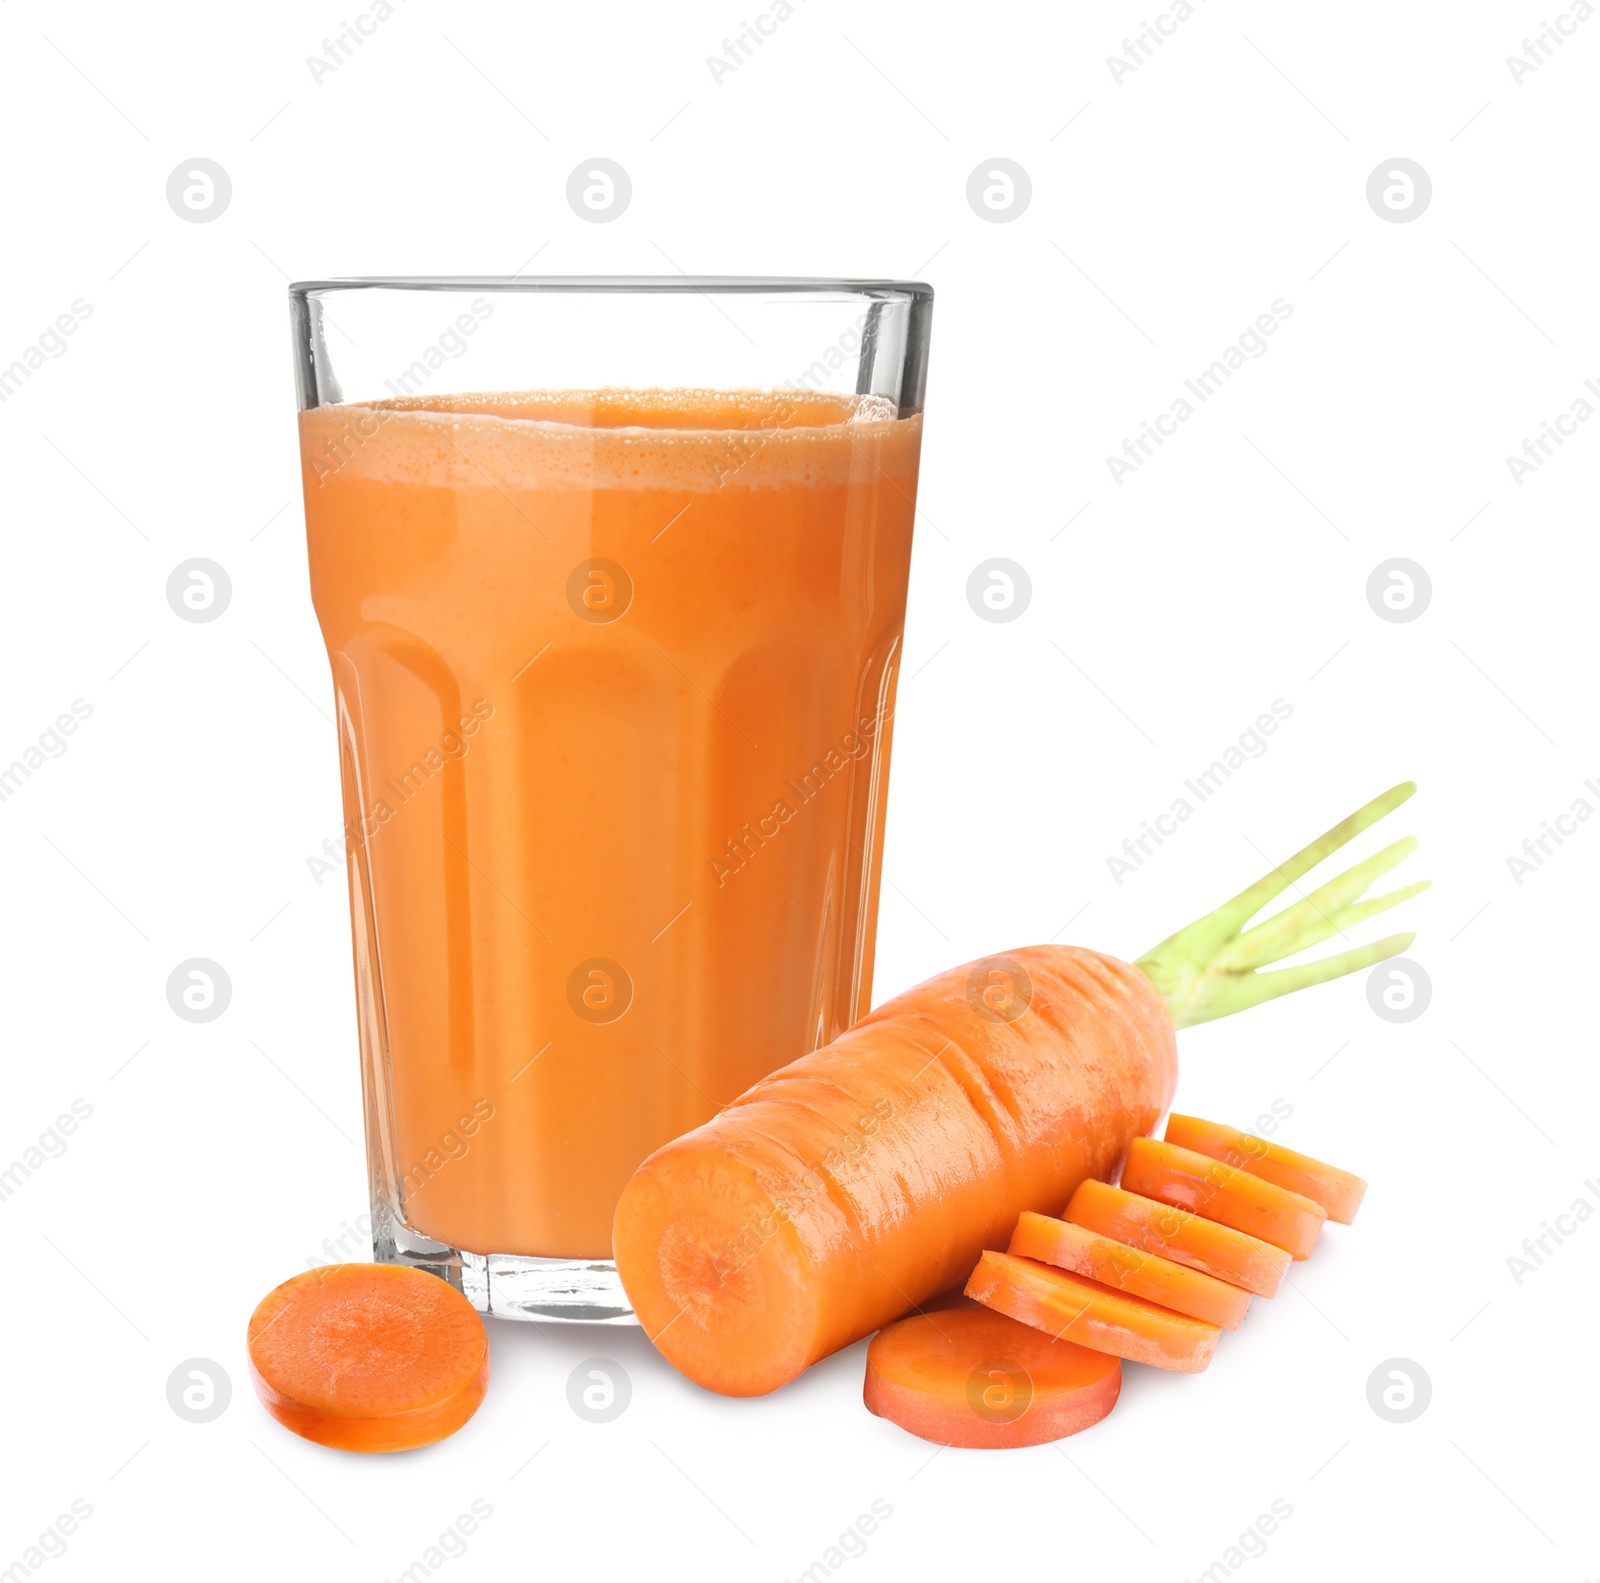 Image of Carrot and glass of fresh juice on white background